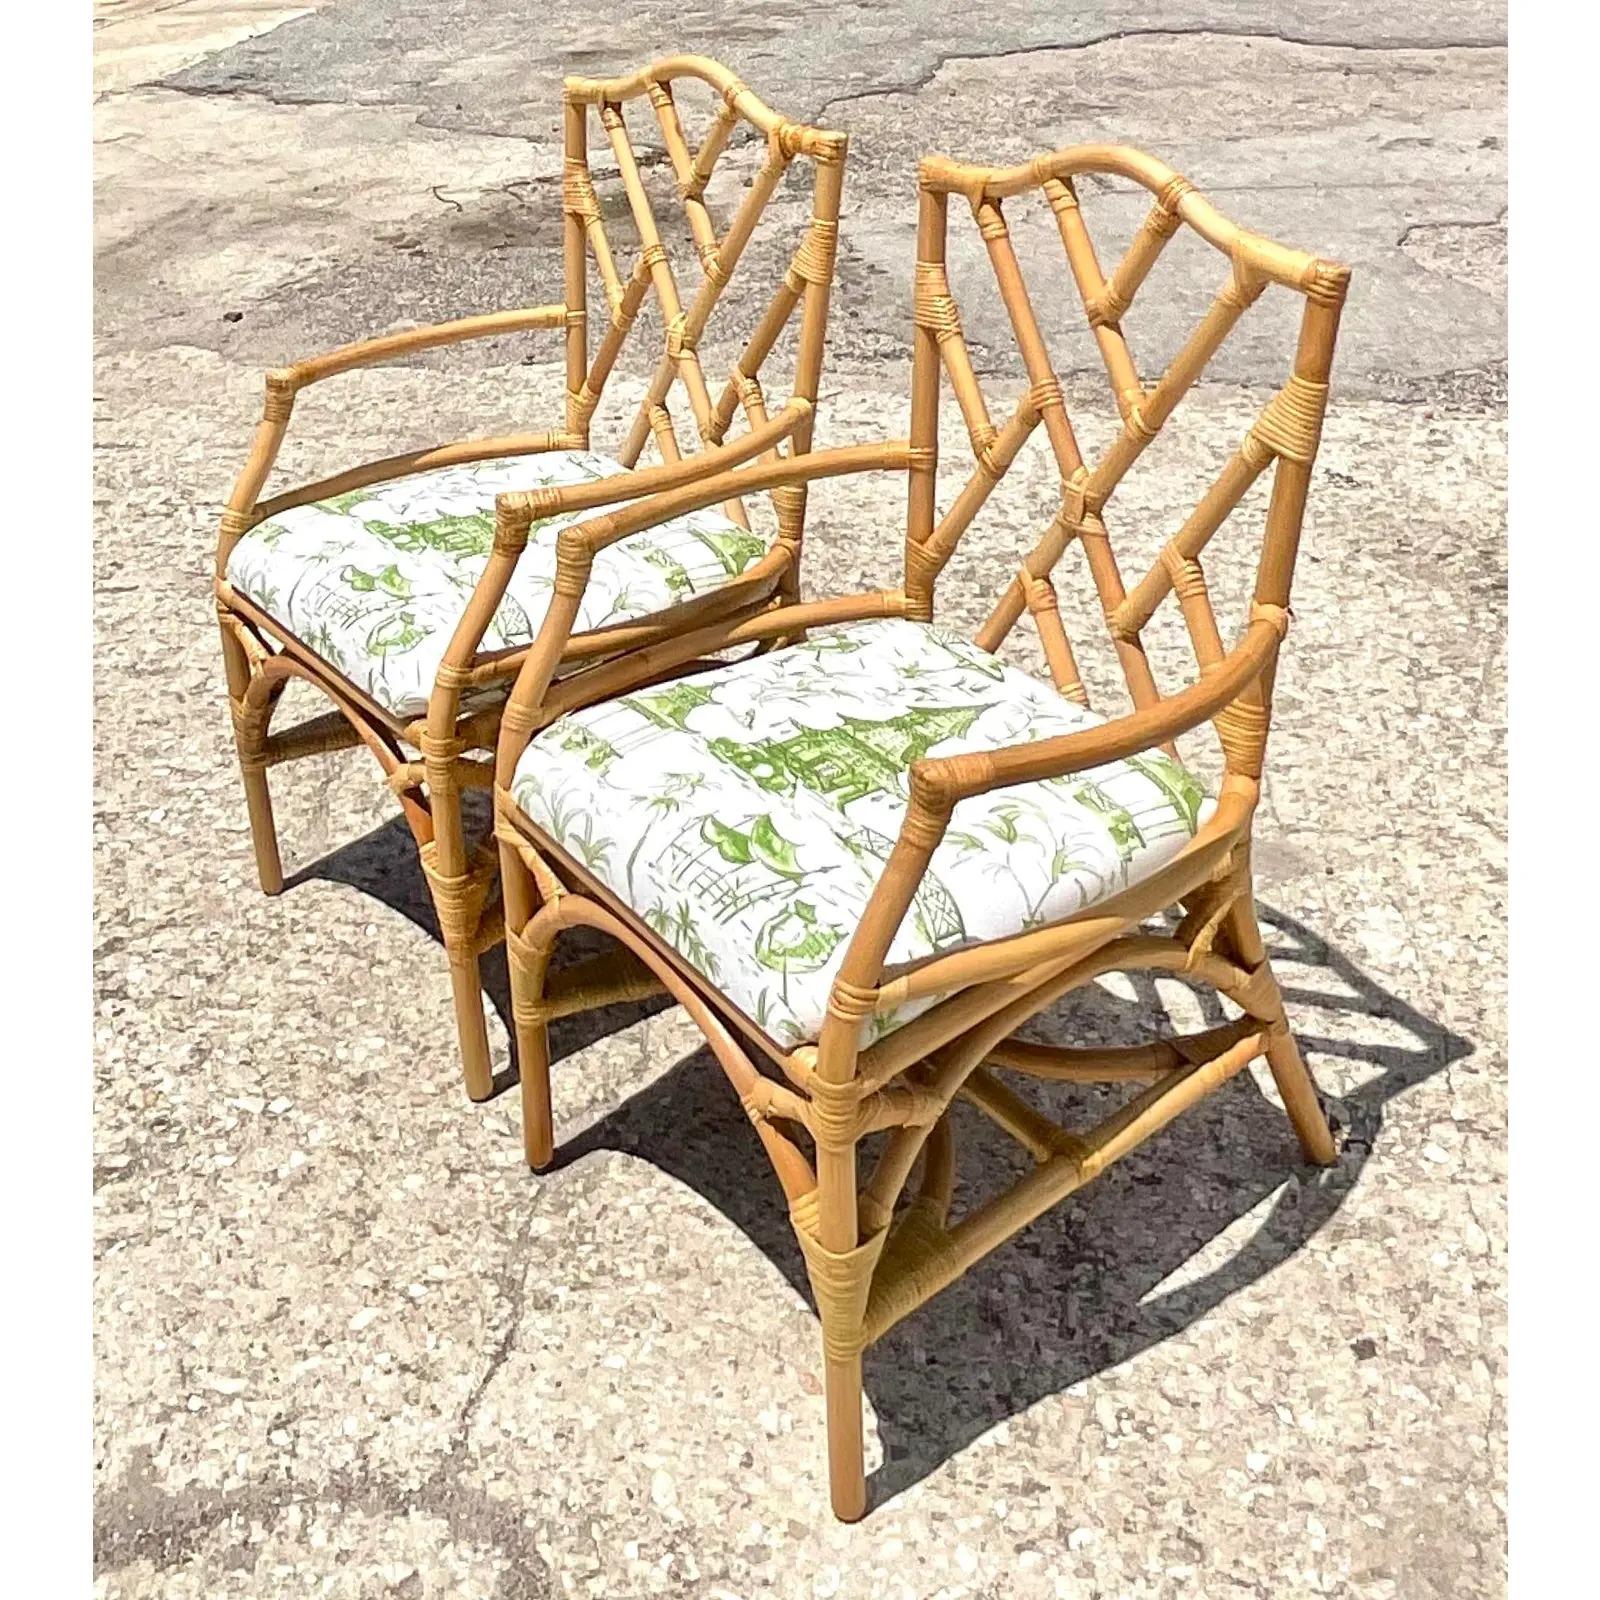 Fantastic pair of vintage Coastal rattan dining chairs. Iconic Chinese Chippendale design in the rattan. A beautiful green and white pagoda print seat. Acquired from a Naples estate.